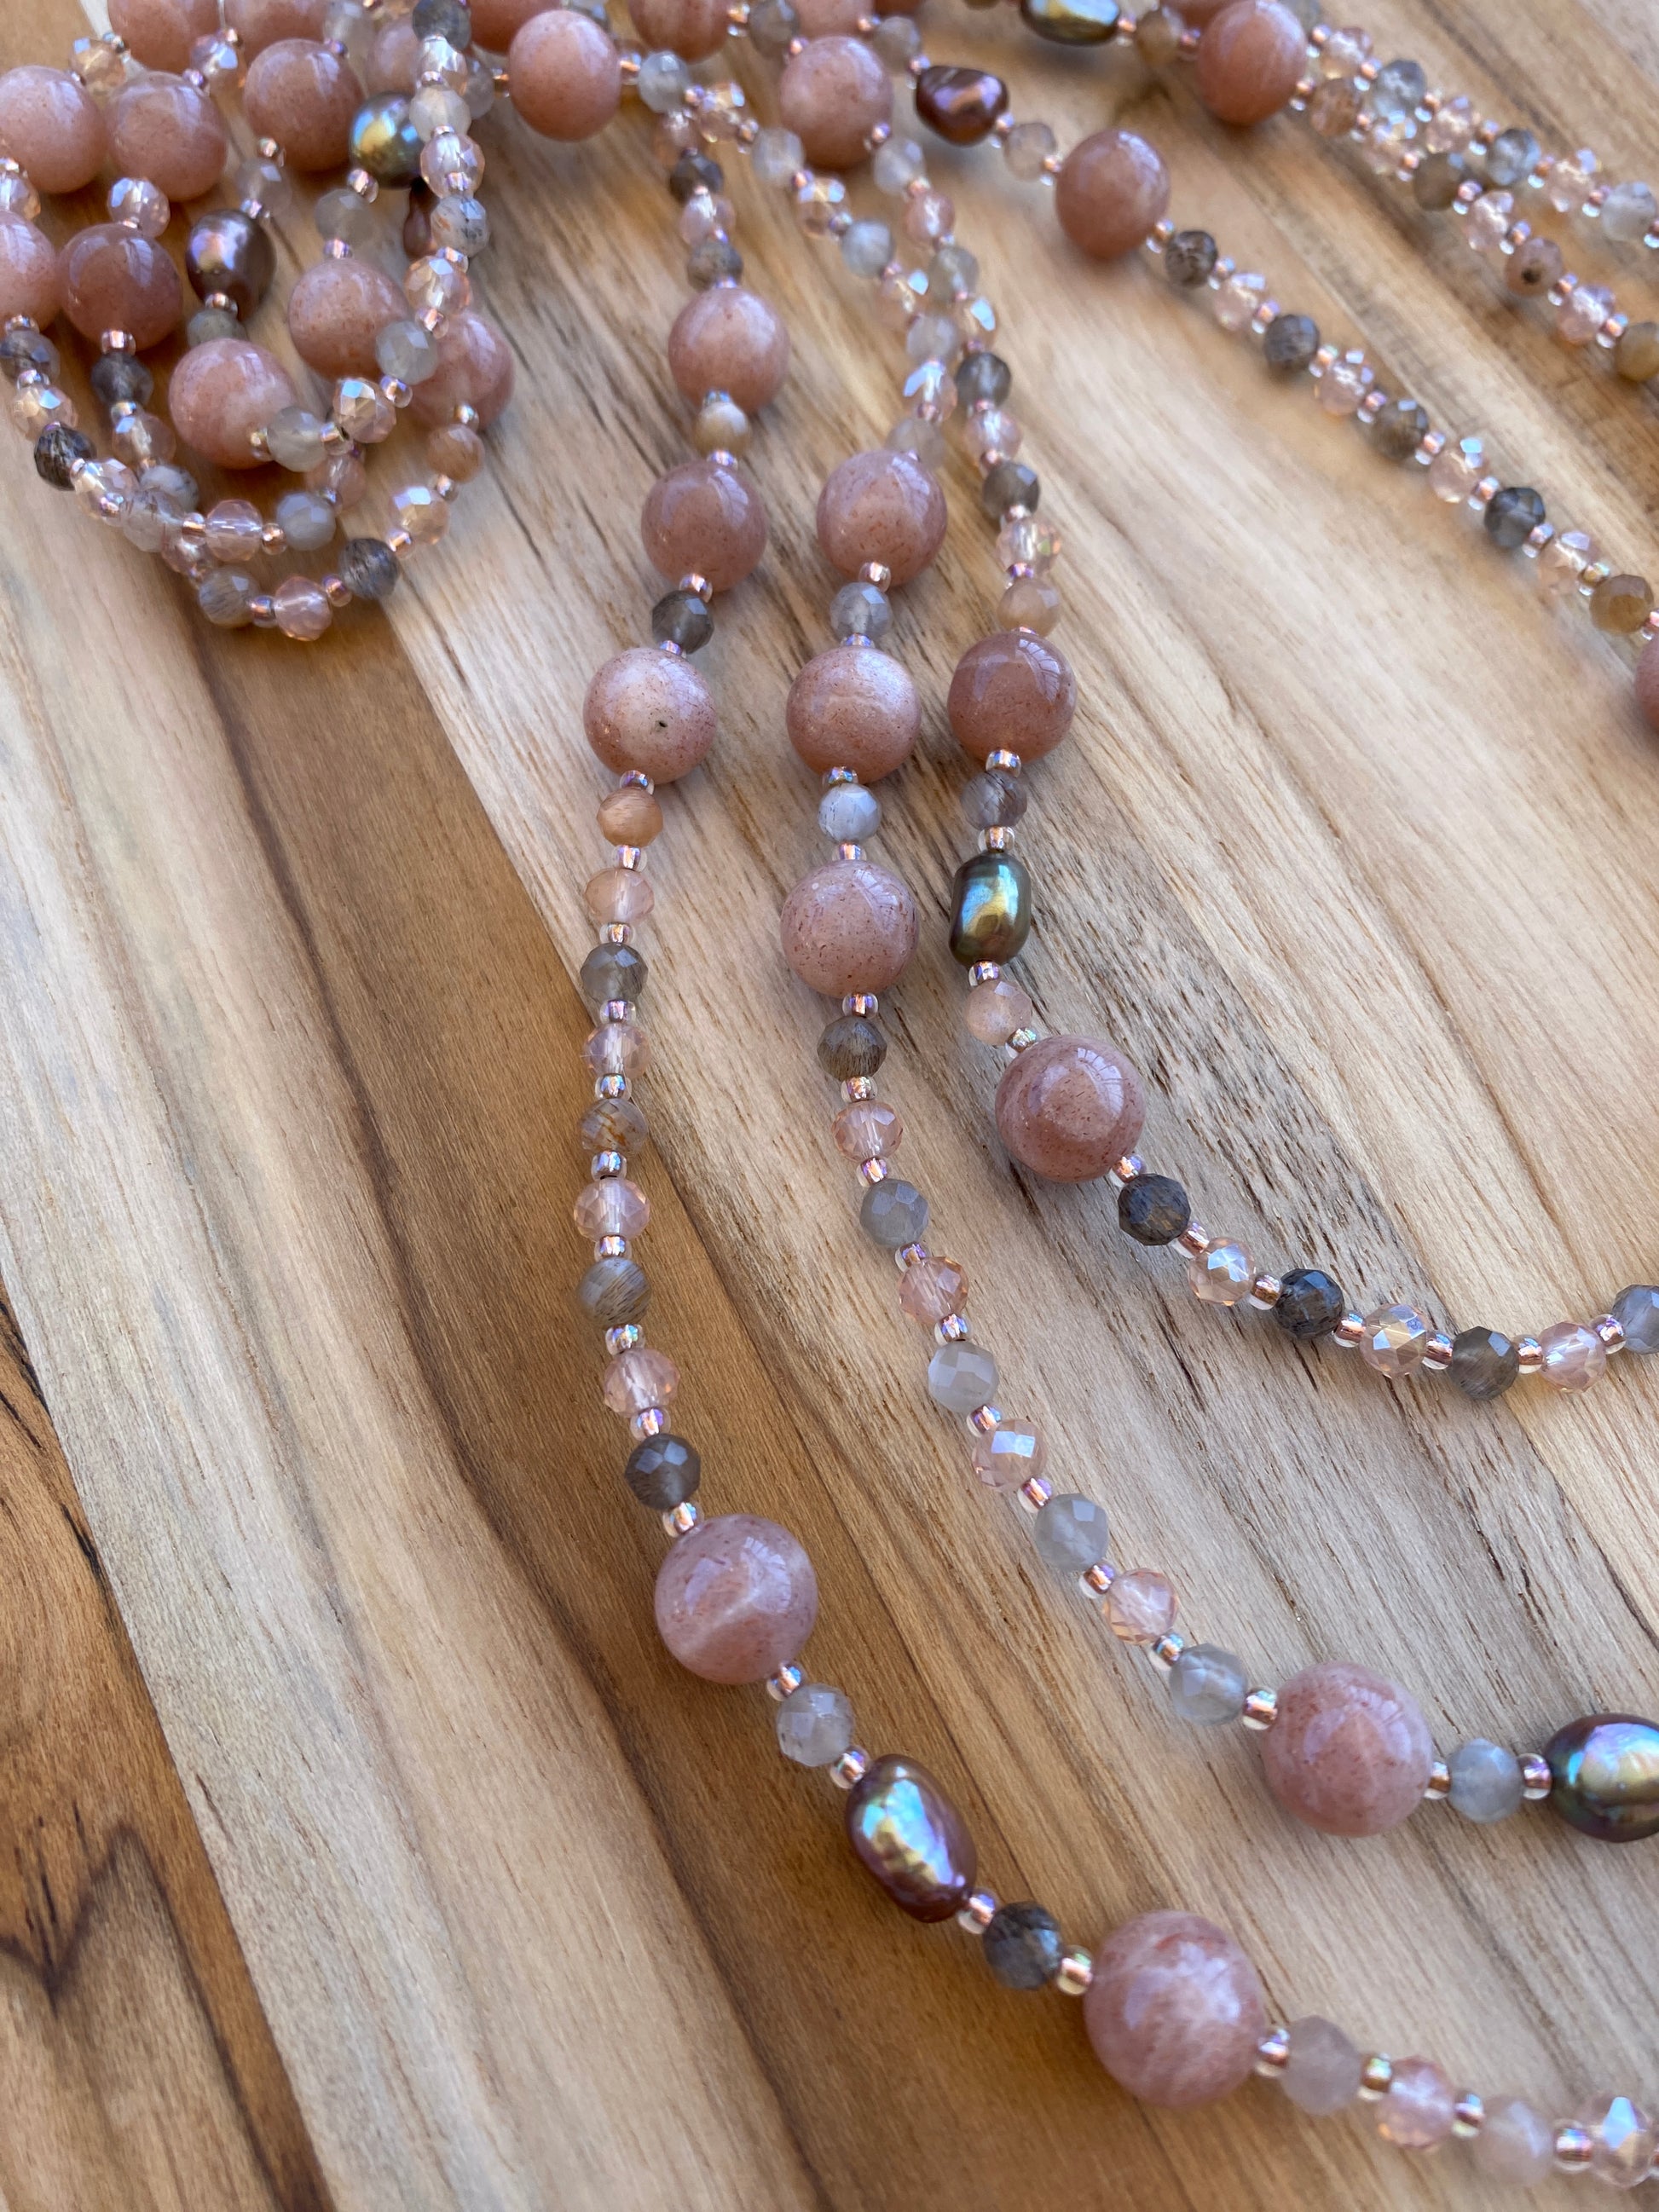 60" Extra Long Beaded Sunstone and Multi Colored Moonstone Necklace with Crystal Beads - My Urban Gems